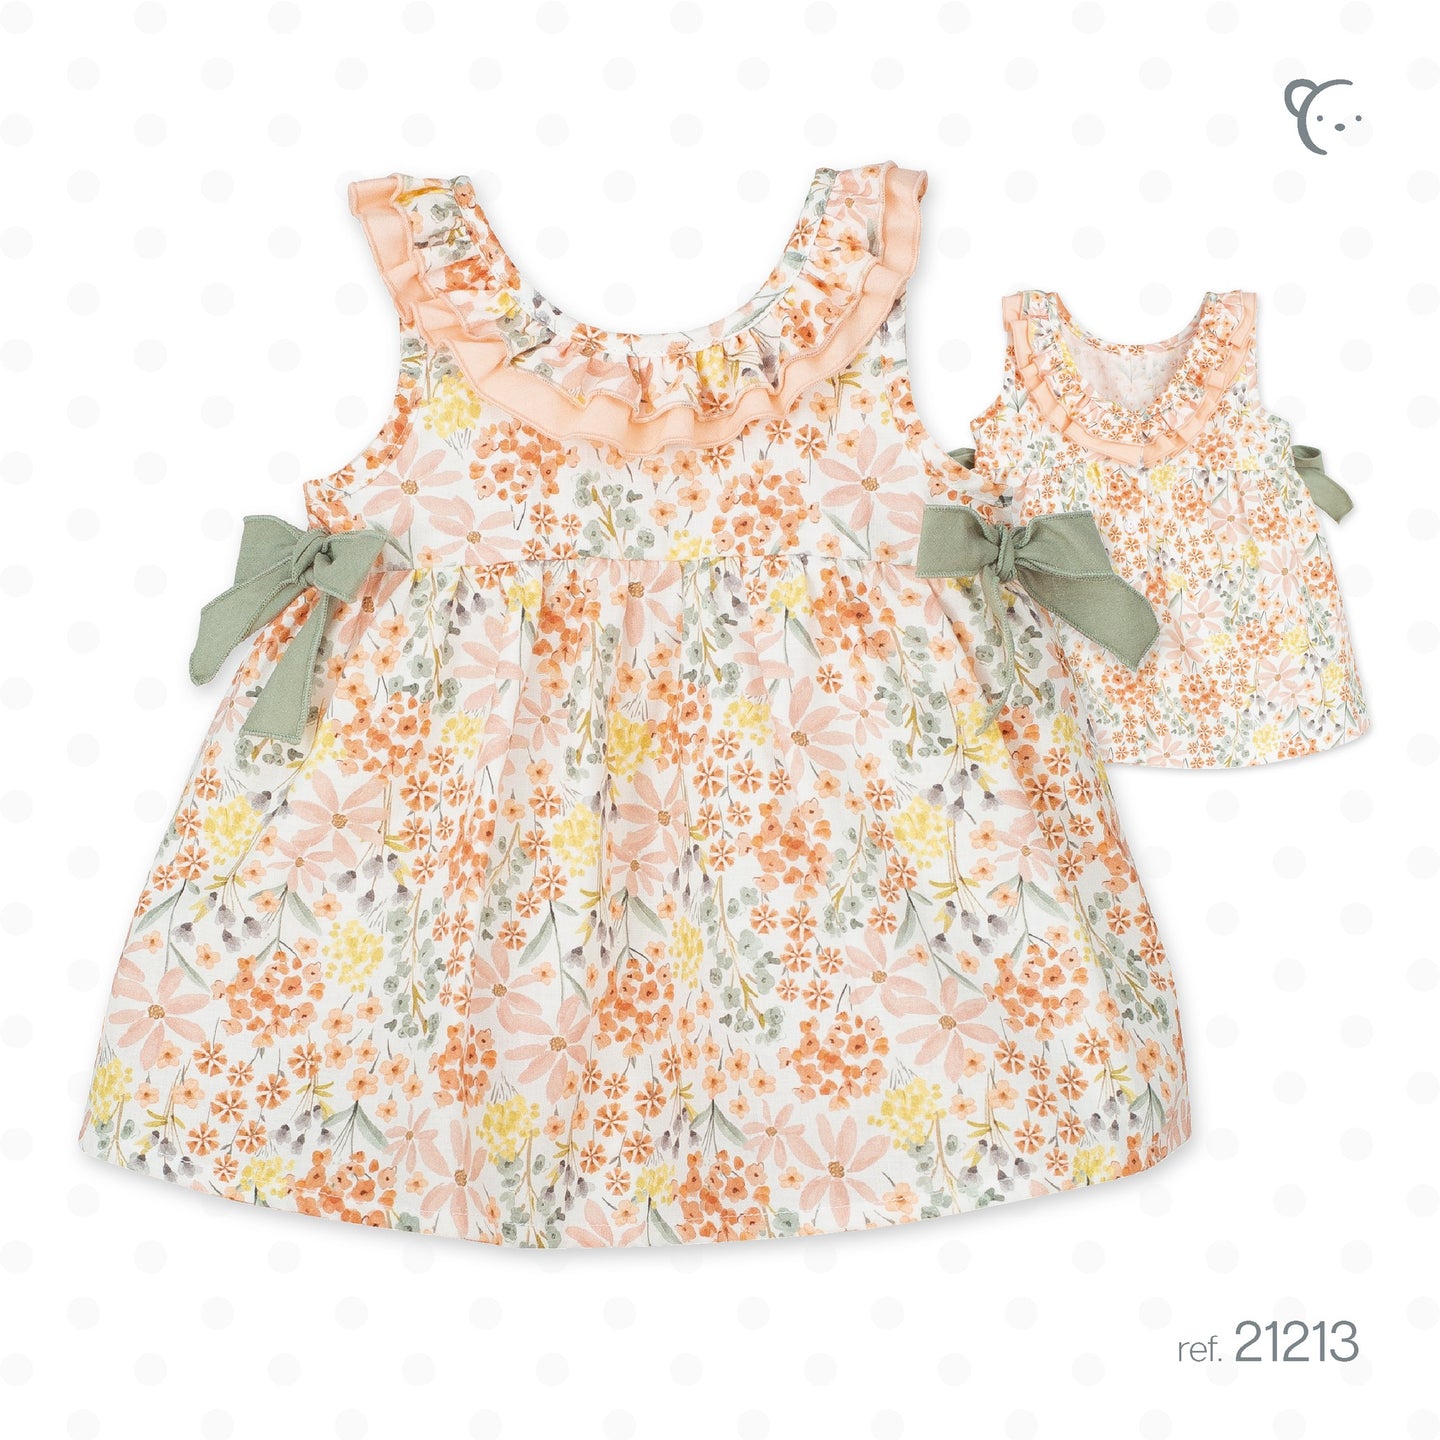 Peach/green floral dress with bows